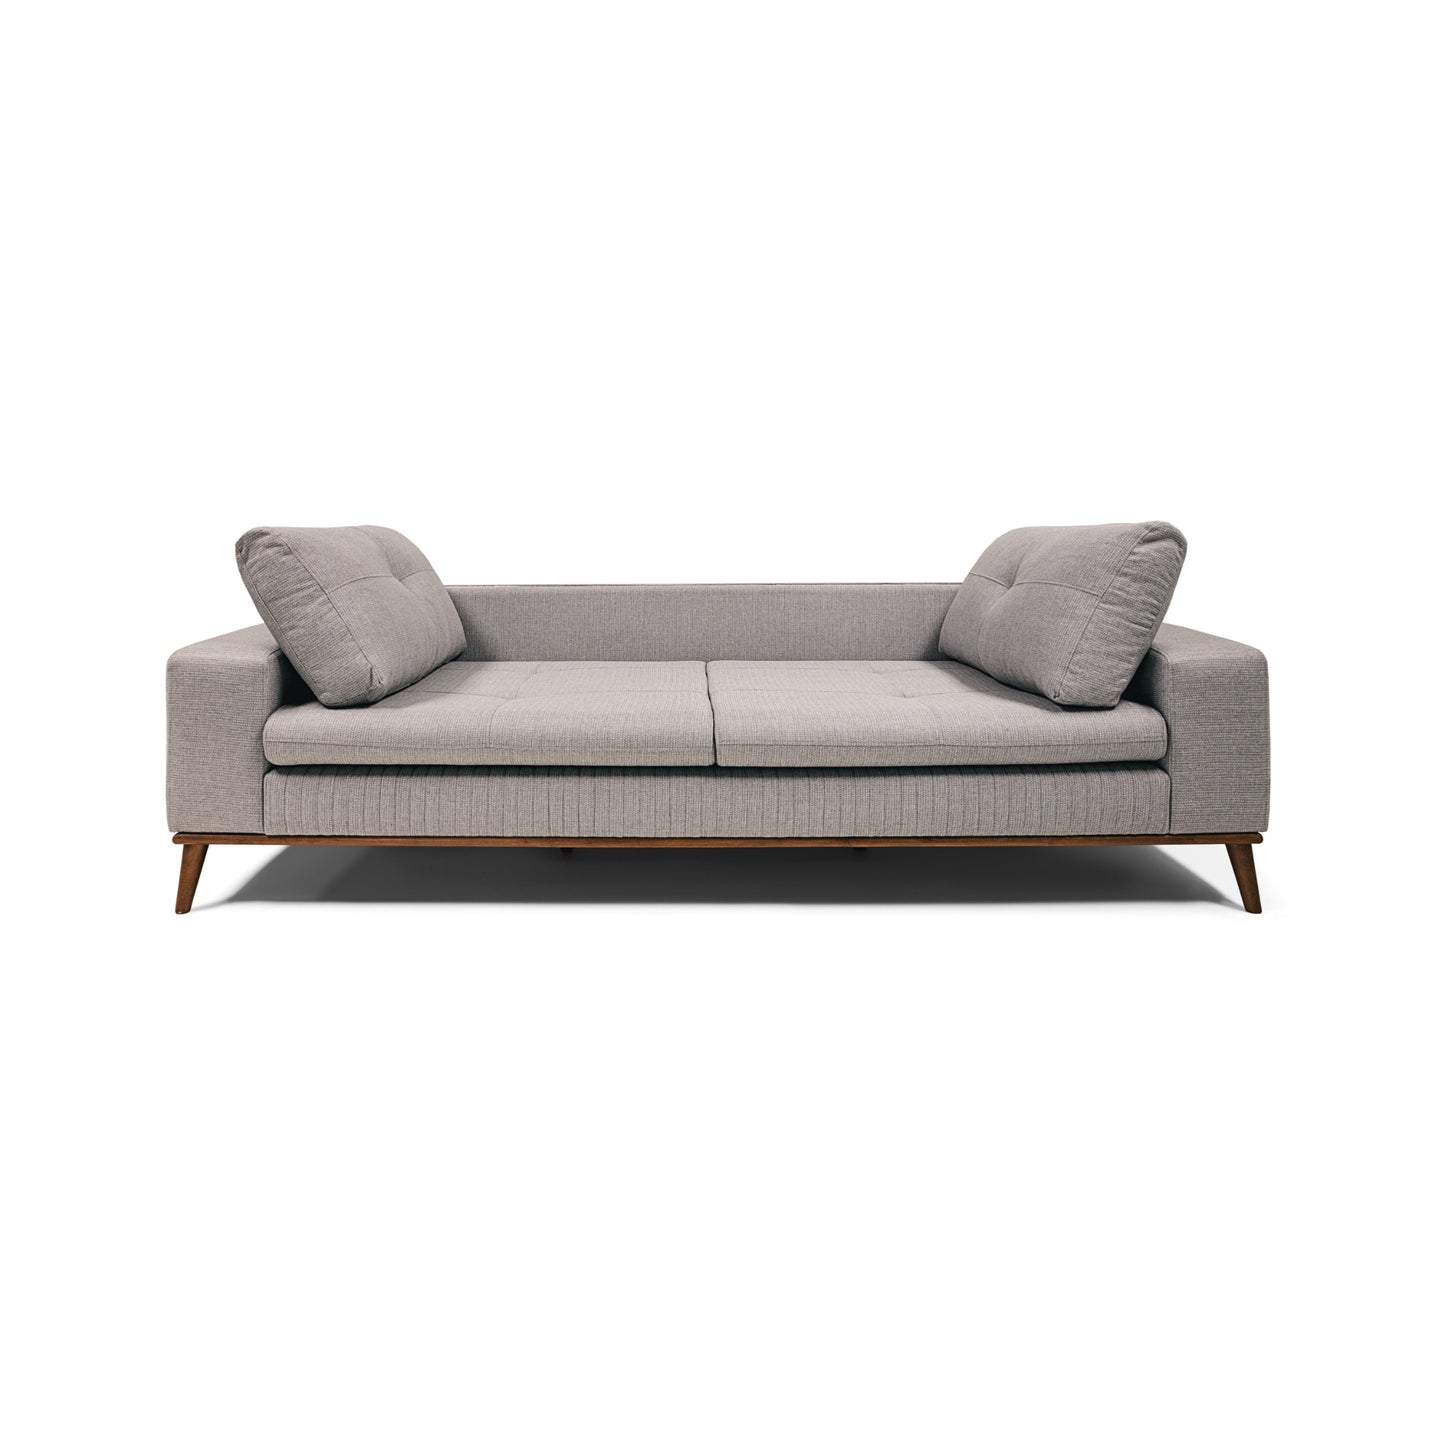 The Piper Large Sofa